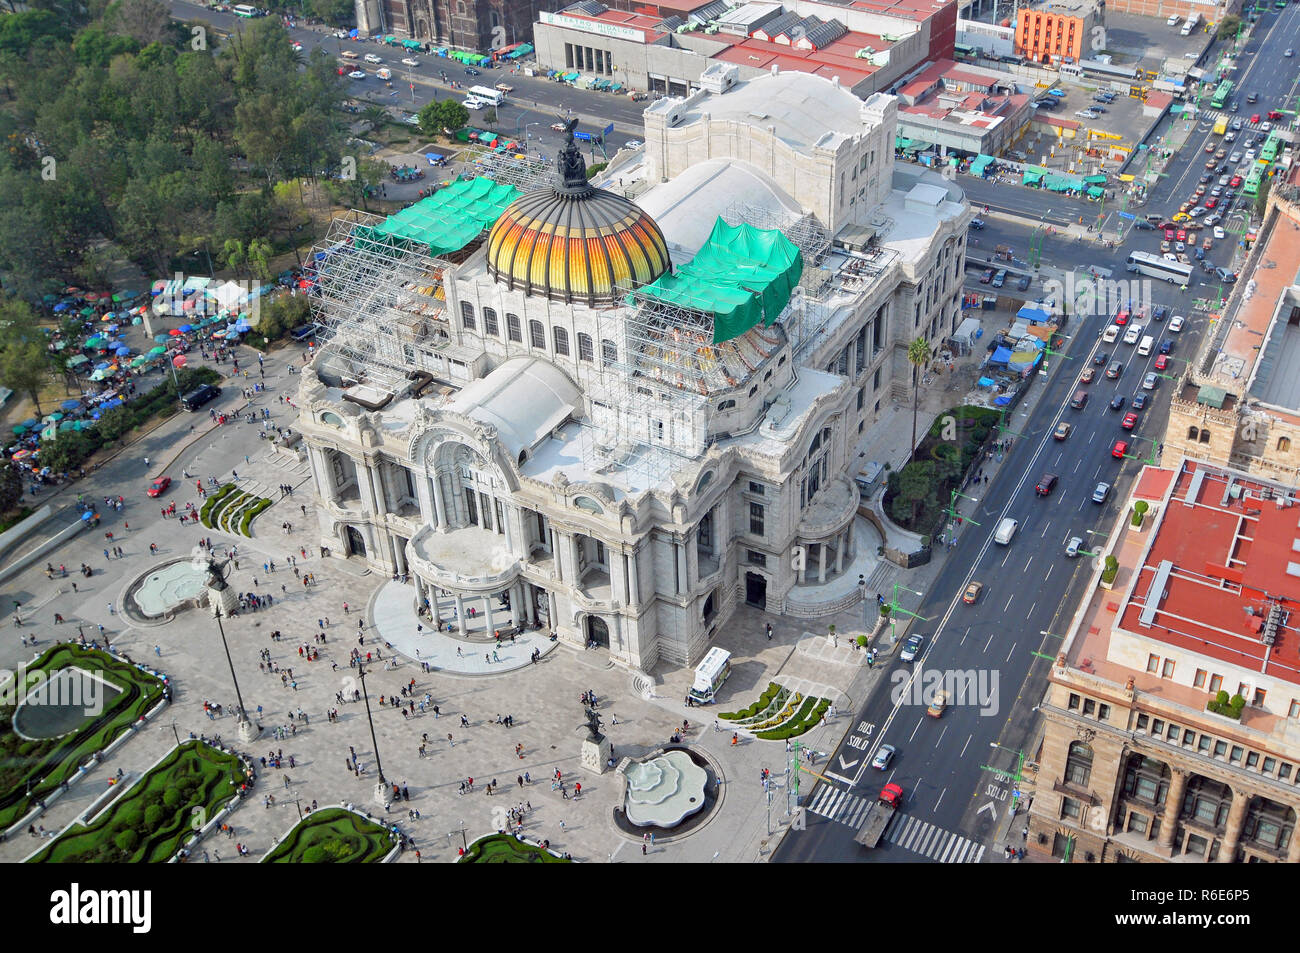 Palacio De Bellas Artes Or Palace Of Fine Arts, A Famous Theater,Museum And Music Venue In Mexico City Stock Photo